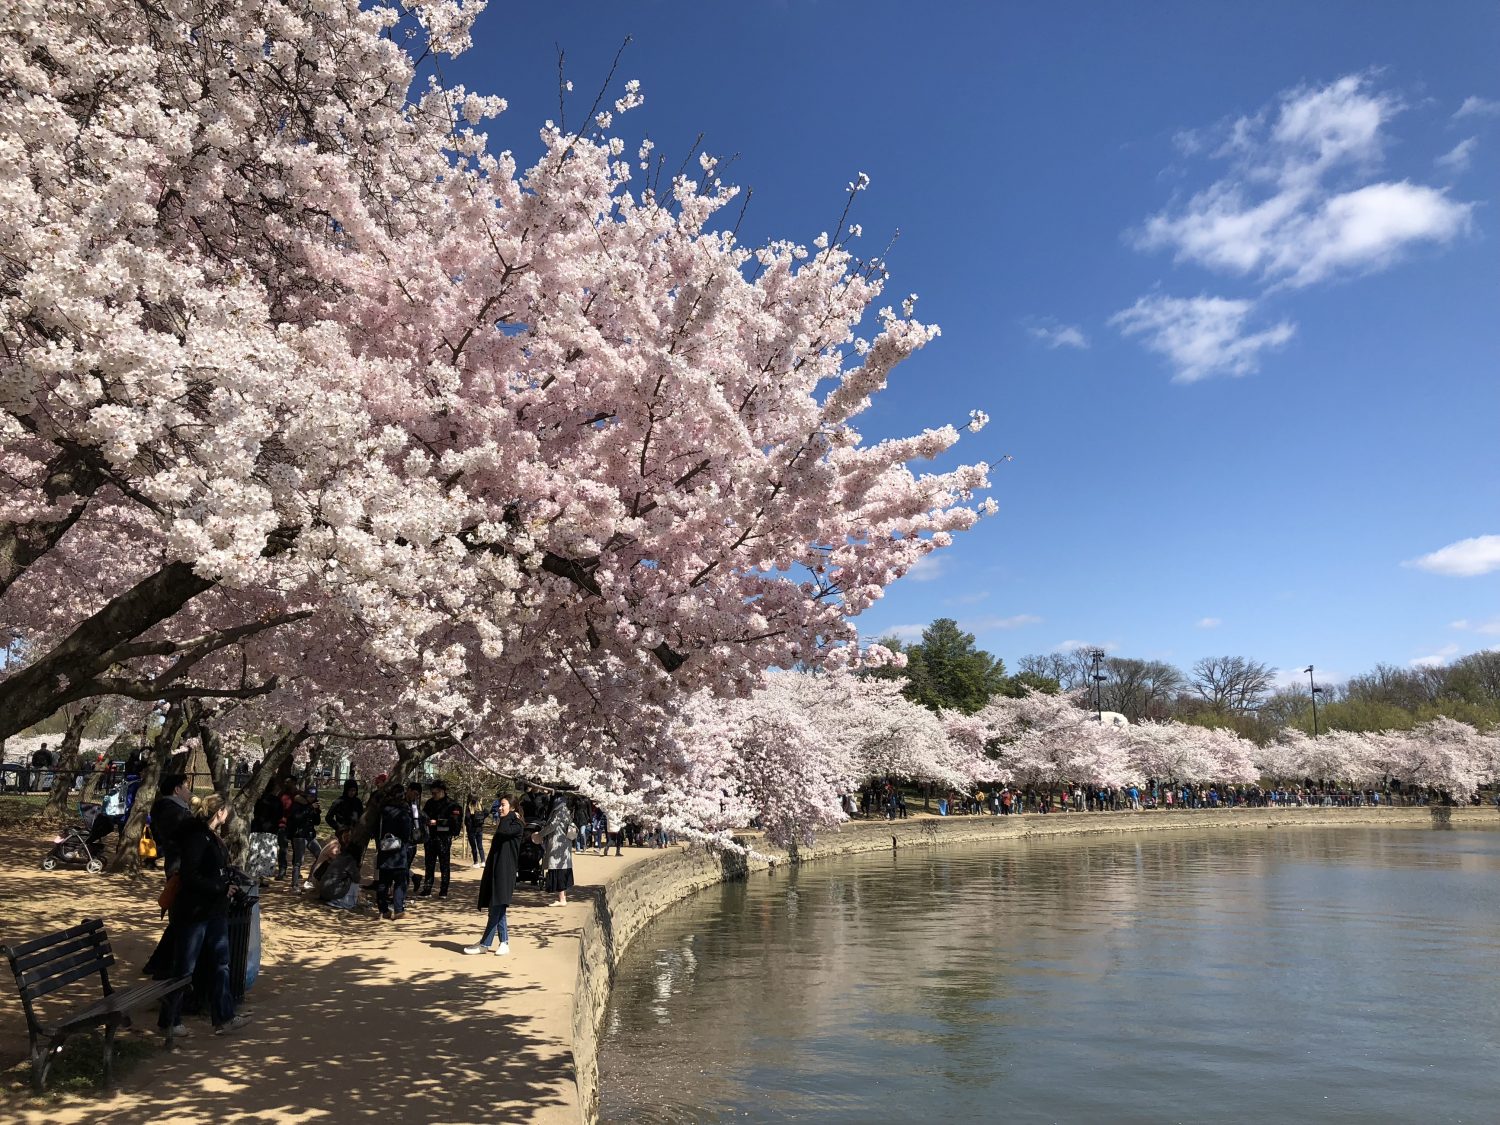 History of the National Cherry Blossom Festival in Washington, D.C